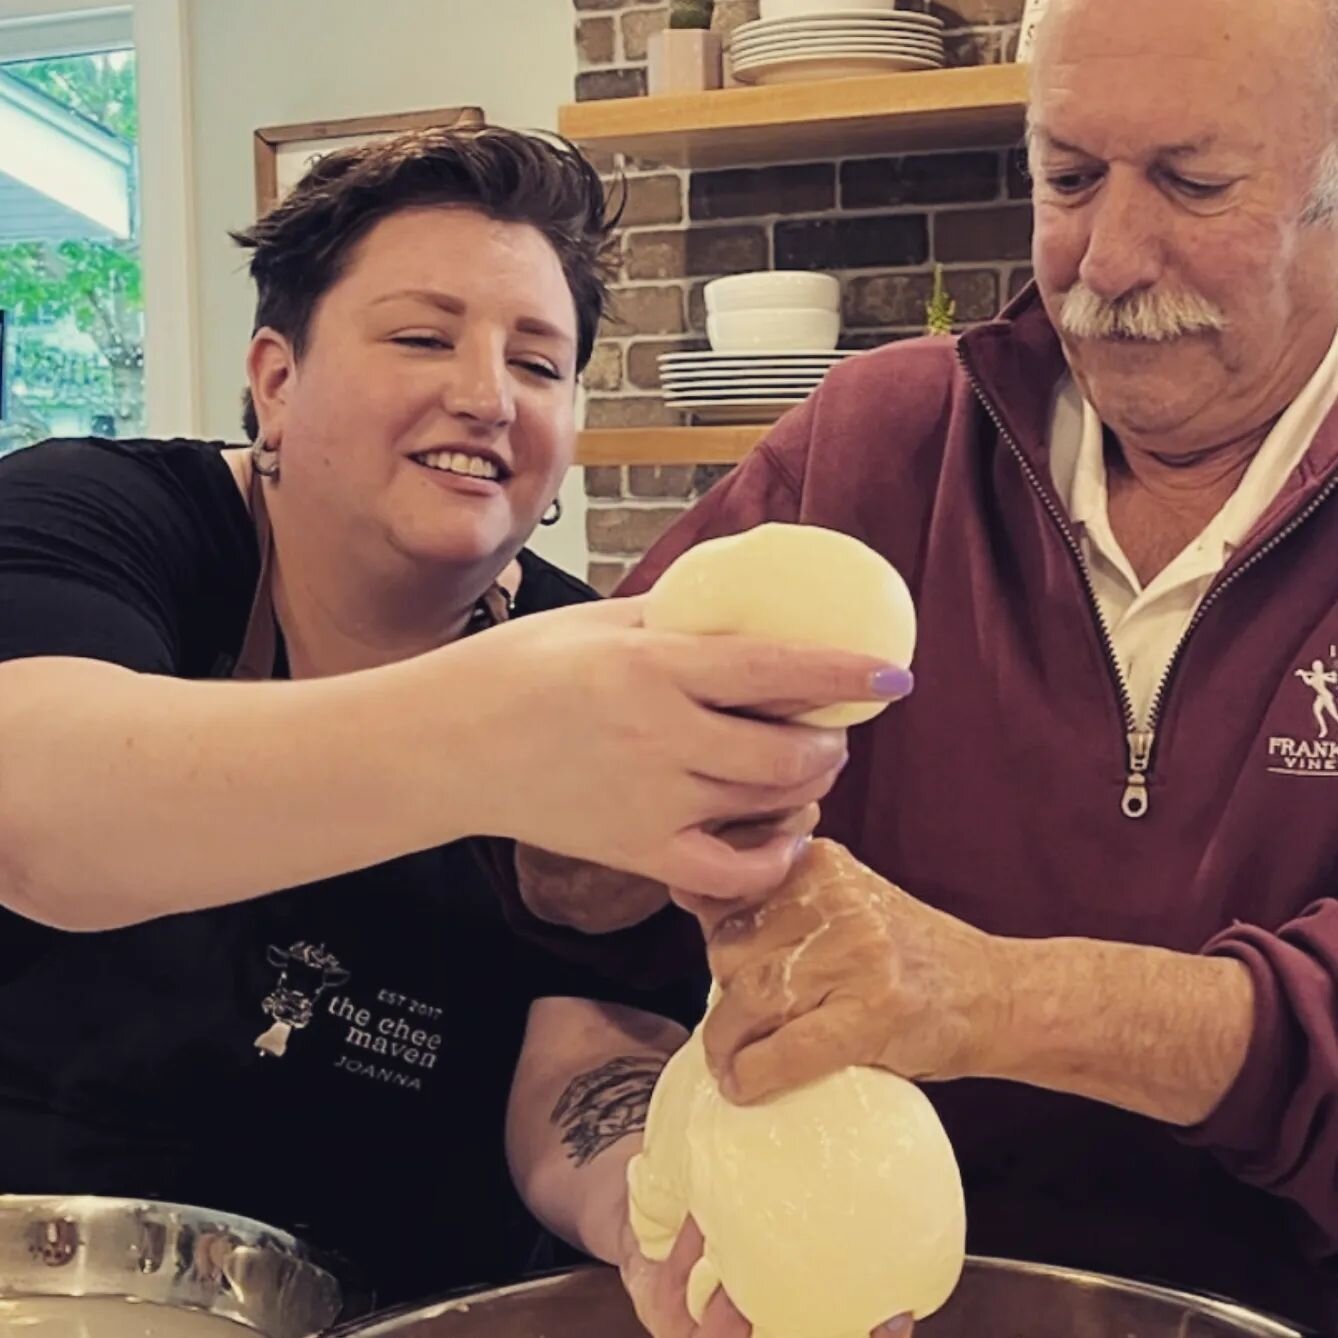 Mozzarella classes are back! Infinite fun for your favorite food loving group. I'll teach you, and then put you right to work! Message us for booking info 💓